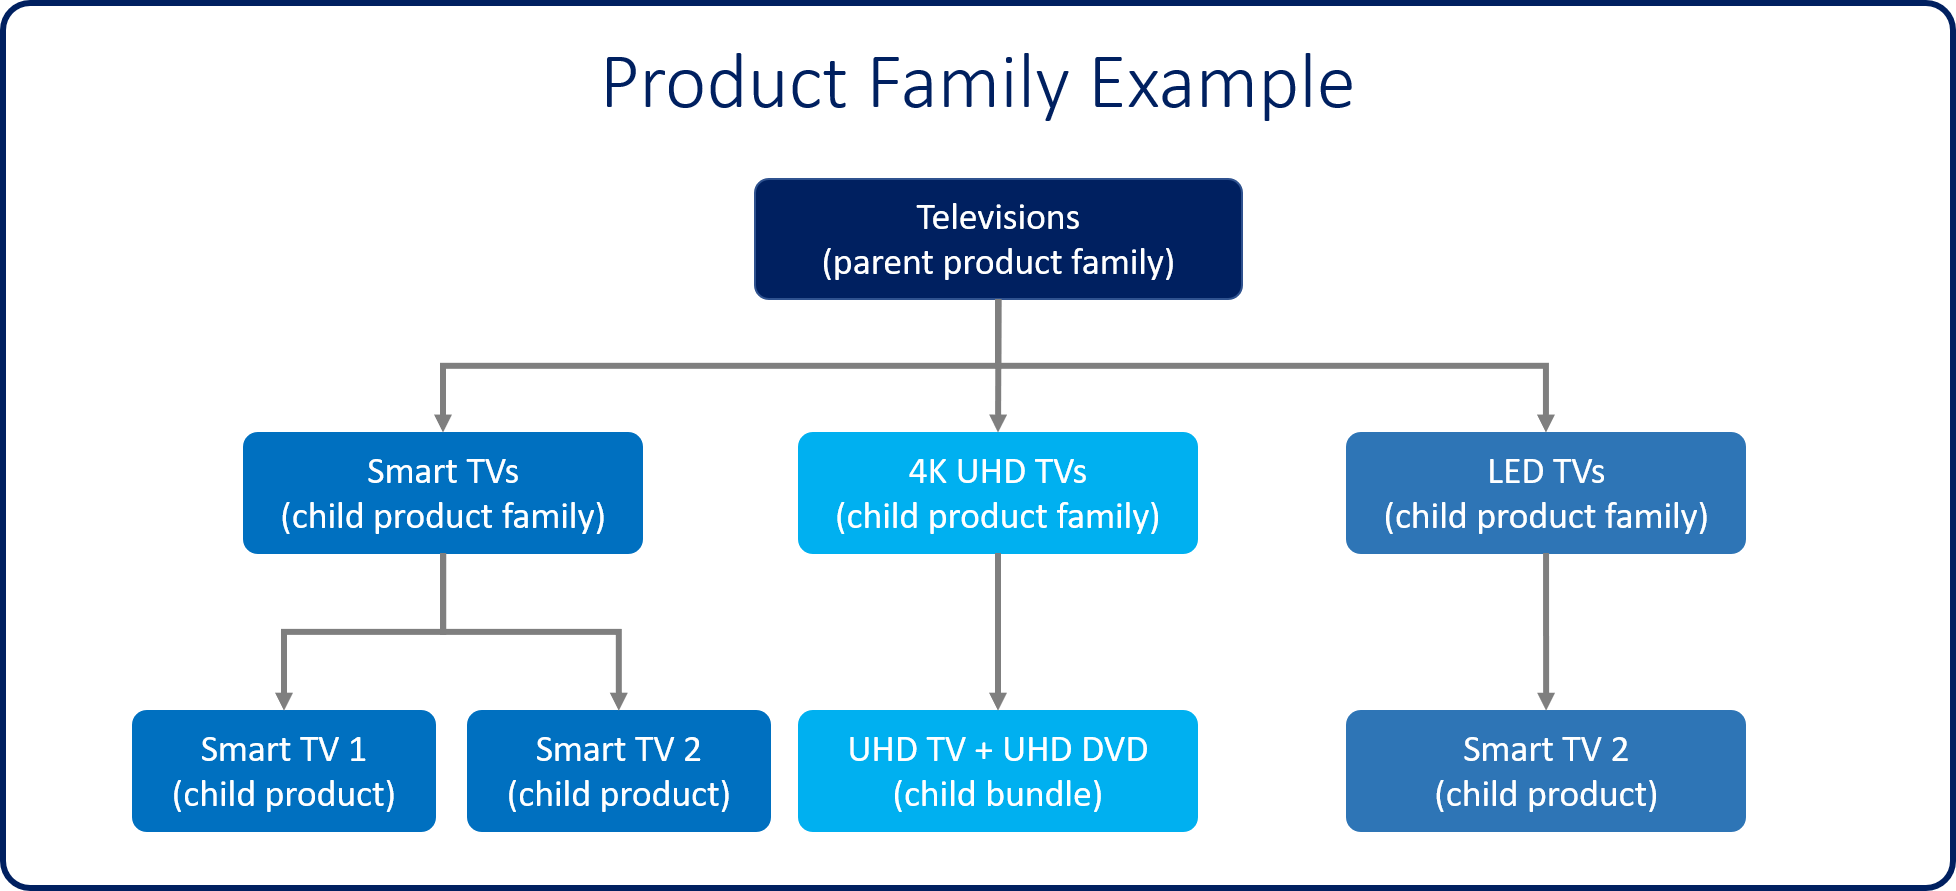 Product family example. Televisions (parent product family) above Smart TVs, 4K UHD TVs, and LED TVs (child product families). Each child product family has one or more child products or child bundles below it.